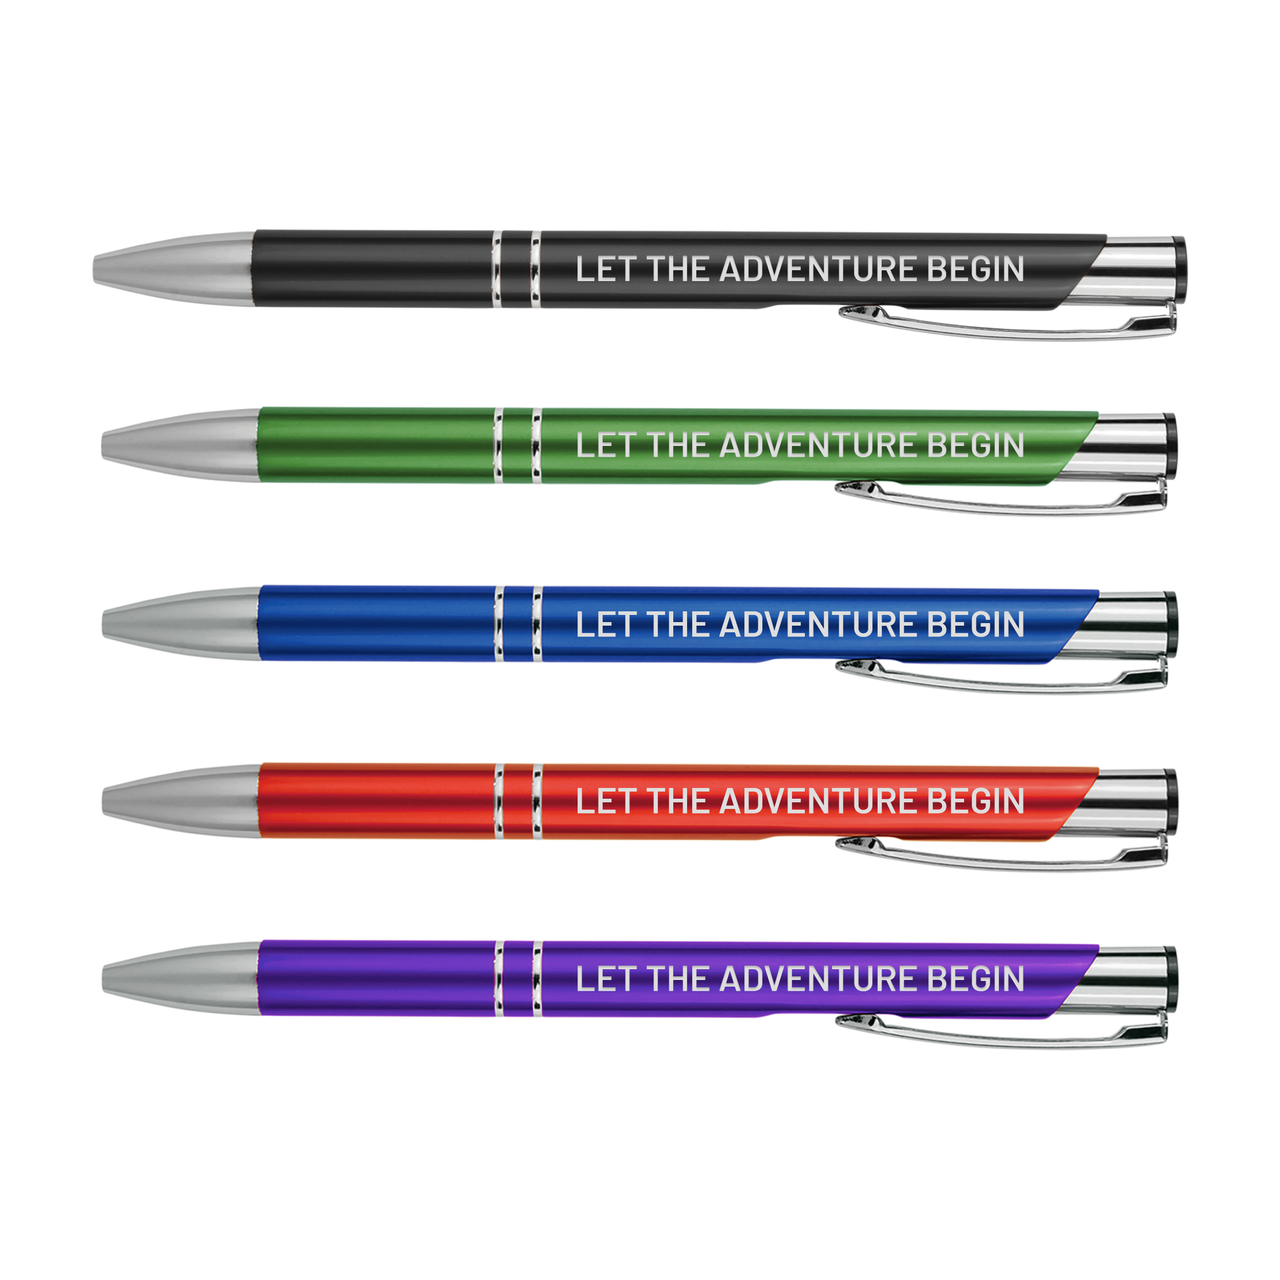 Let The Adventure Begin Metal Pens | Motivational Writing Tools Office Supplies Coworker Gifts Stocking Stuffer Baum Designs